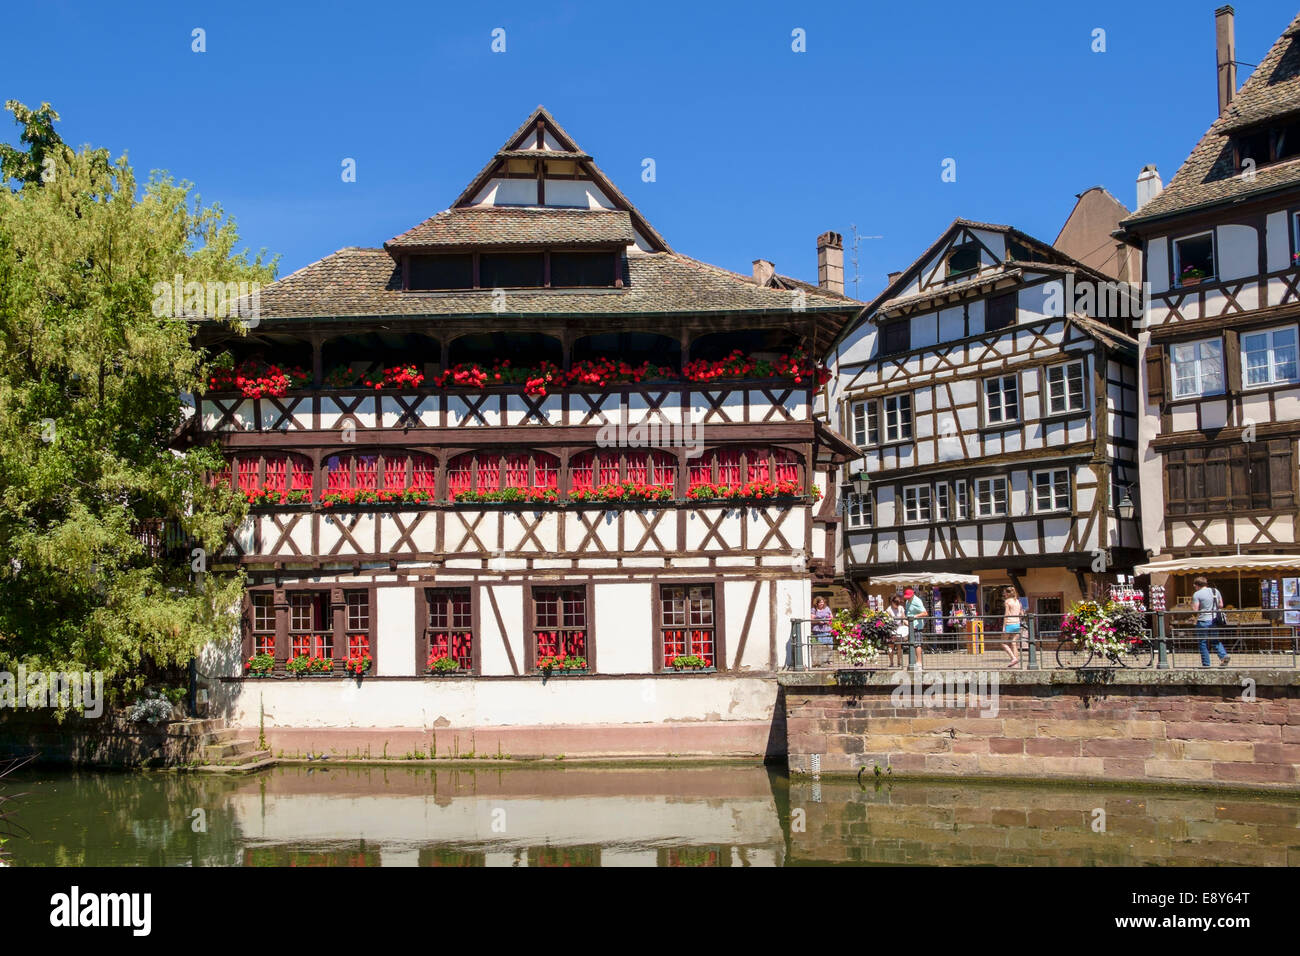 Strasbourg - Beautiful old medieval house in Petite France, Strasbourg, France, Europe Stock Photo